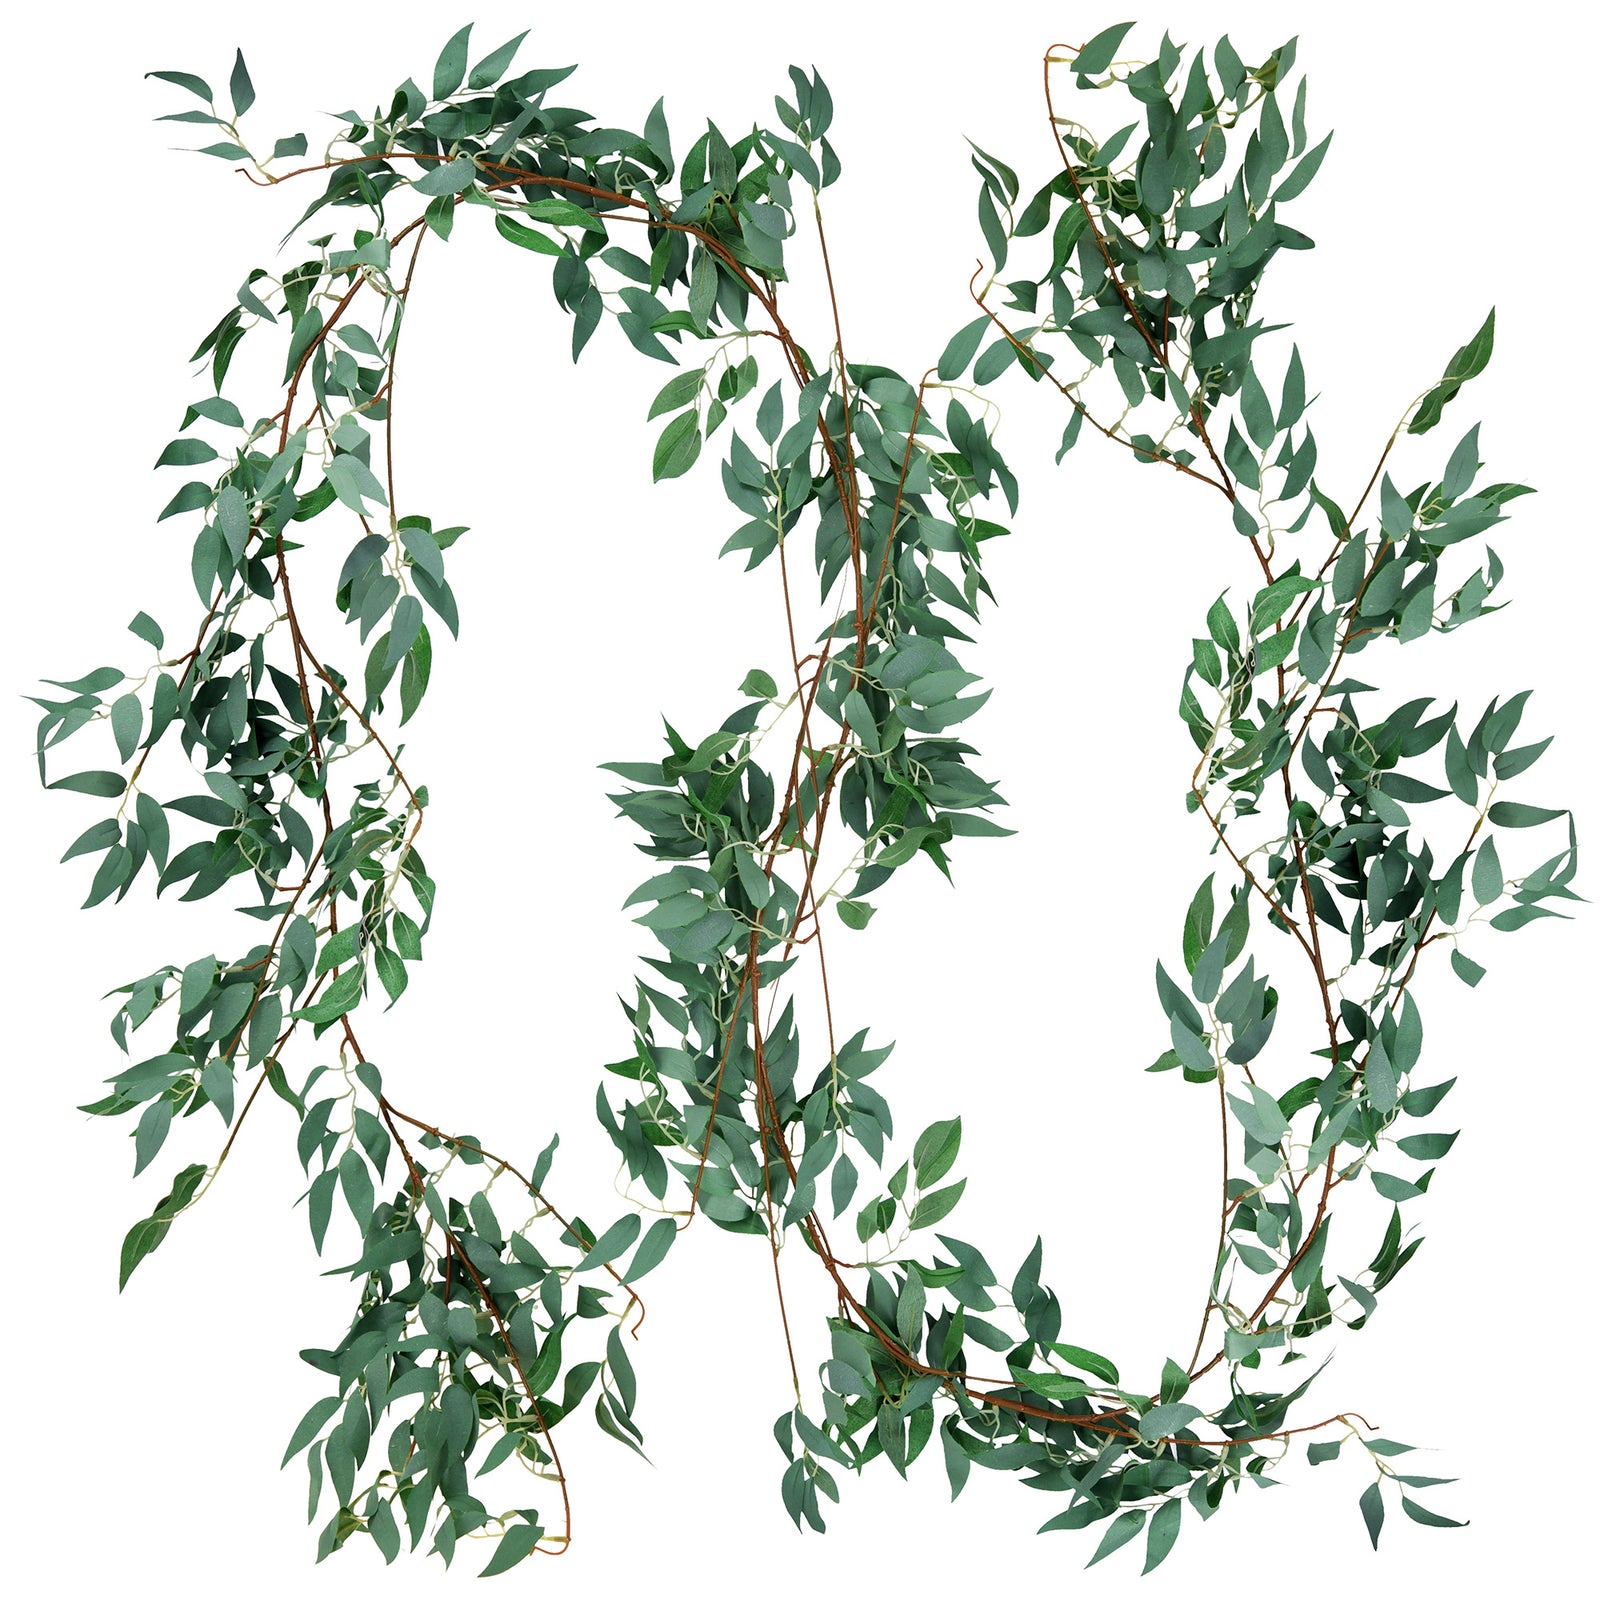 FiveSeasonStuff 2 Pcs Willow Leaves Garland Artificial Silk Leaves Vine Hanging Decorations for Home Wall Decoration, Wedding Decor, Bridal, Wreaths (foggy green)